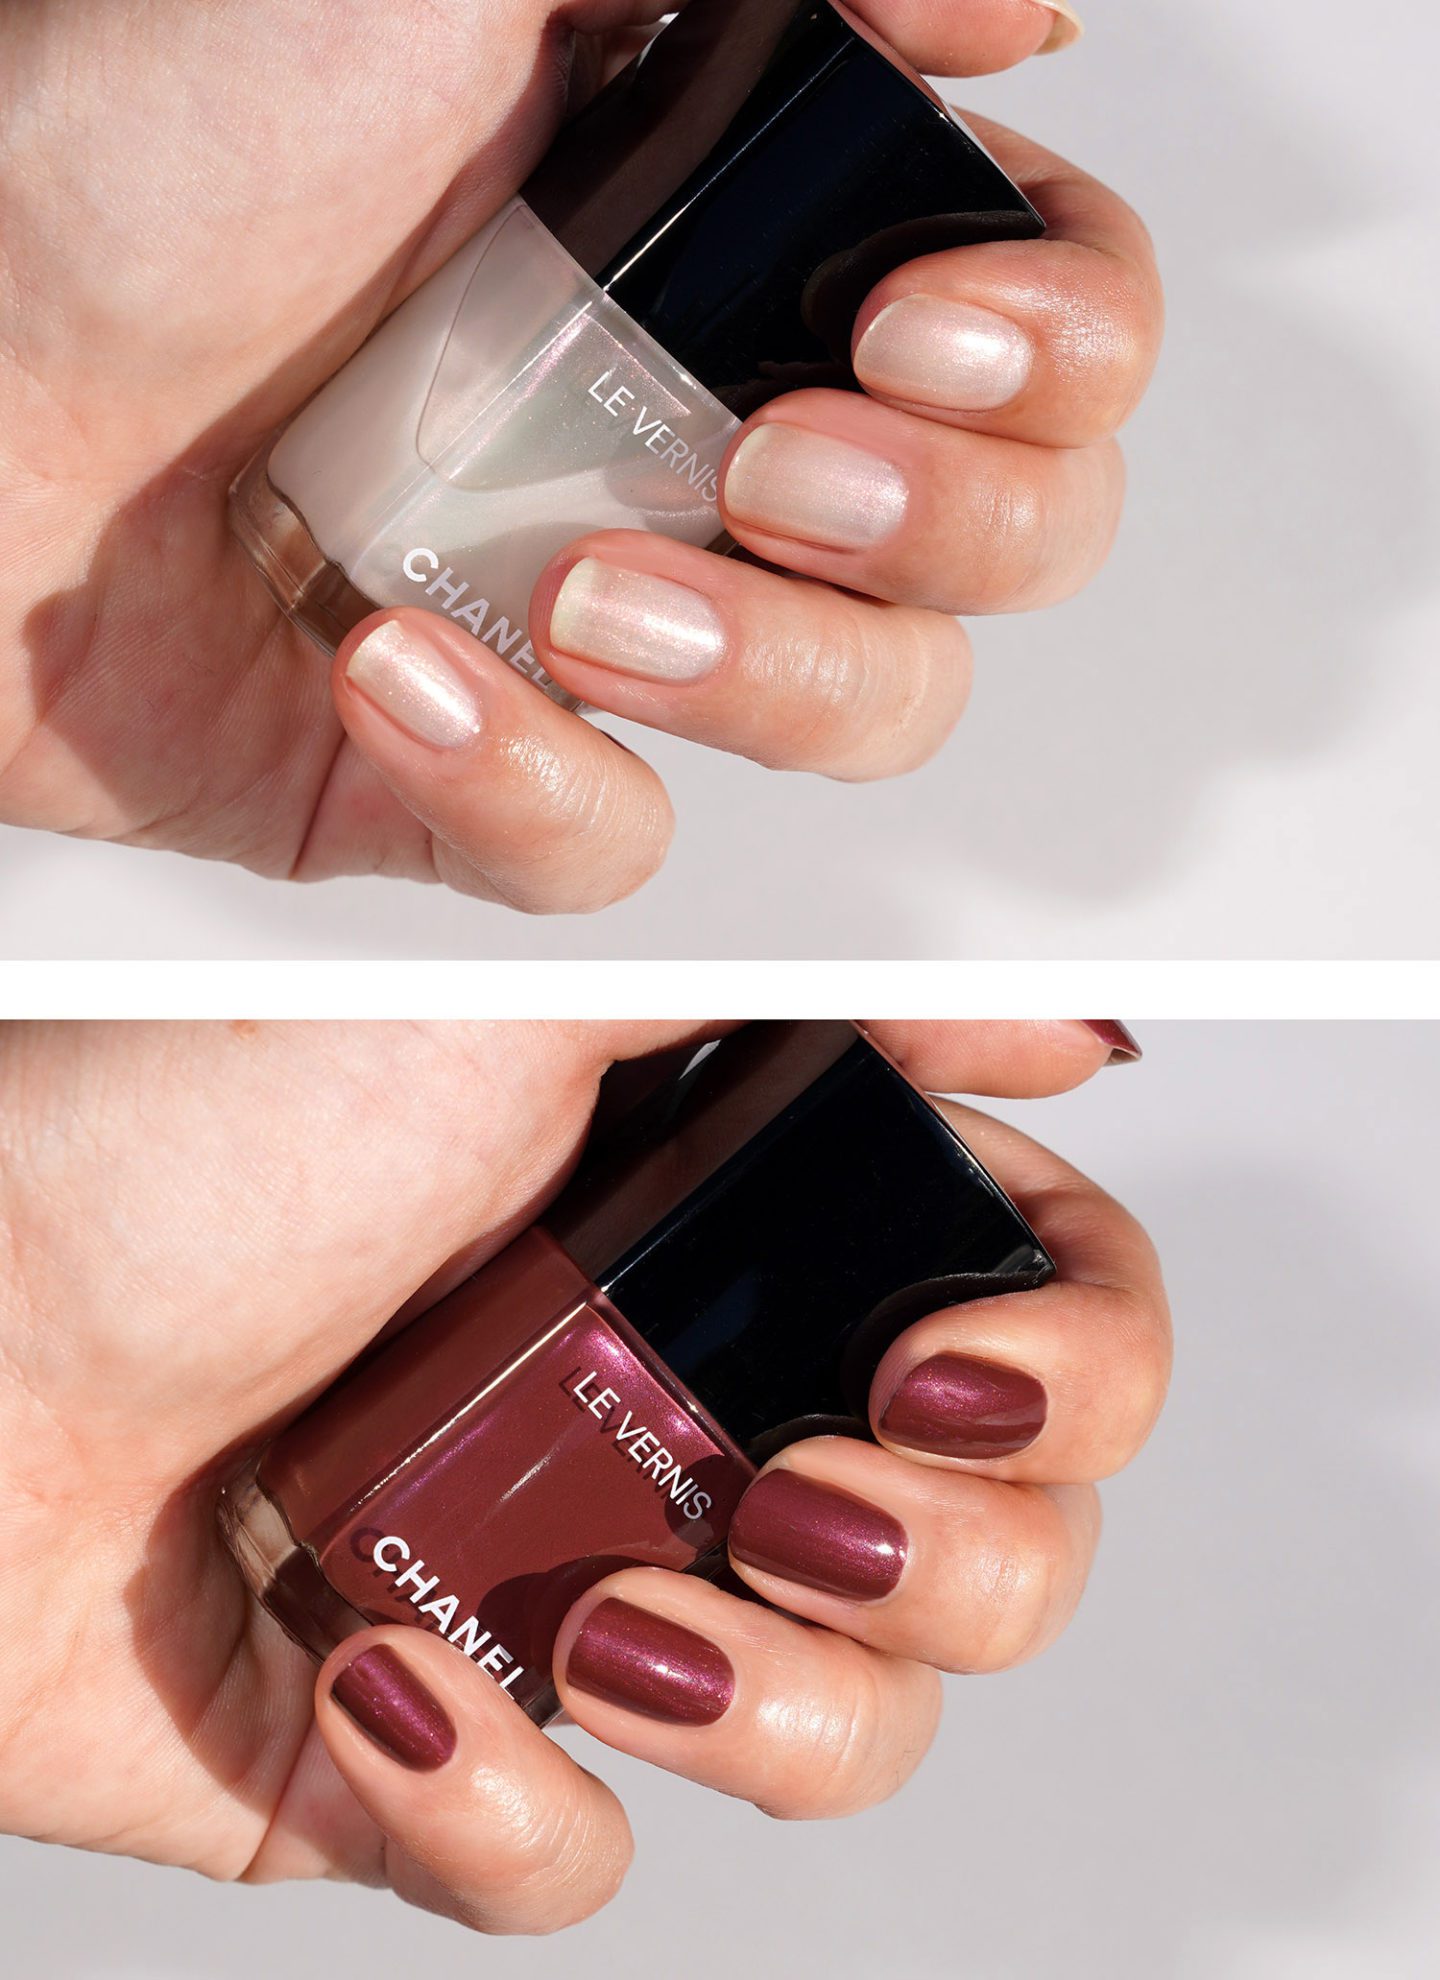 Chanel Le Vernis Perle Blanche 889 and Perle Burgundy 891 swatches